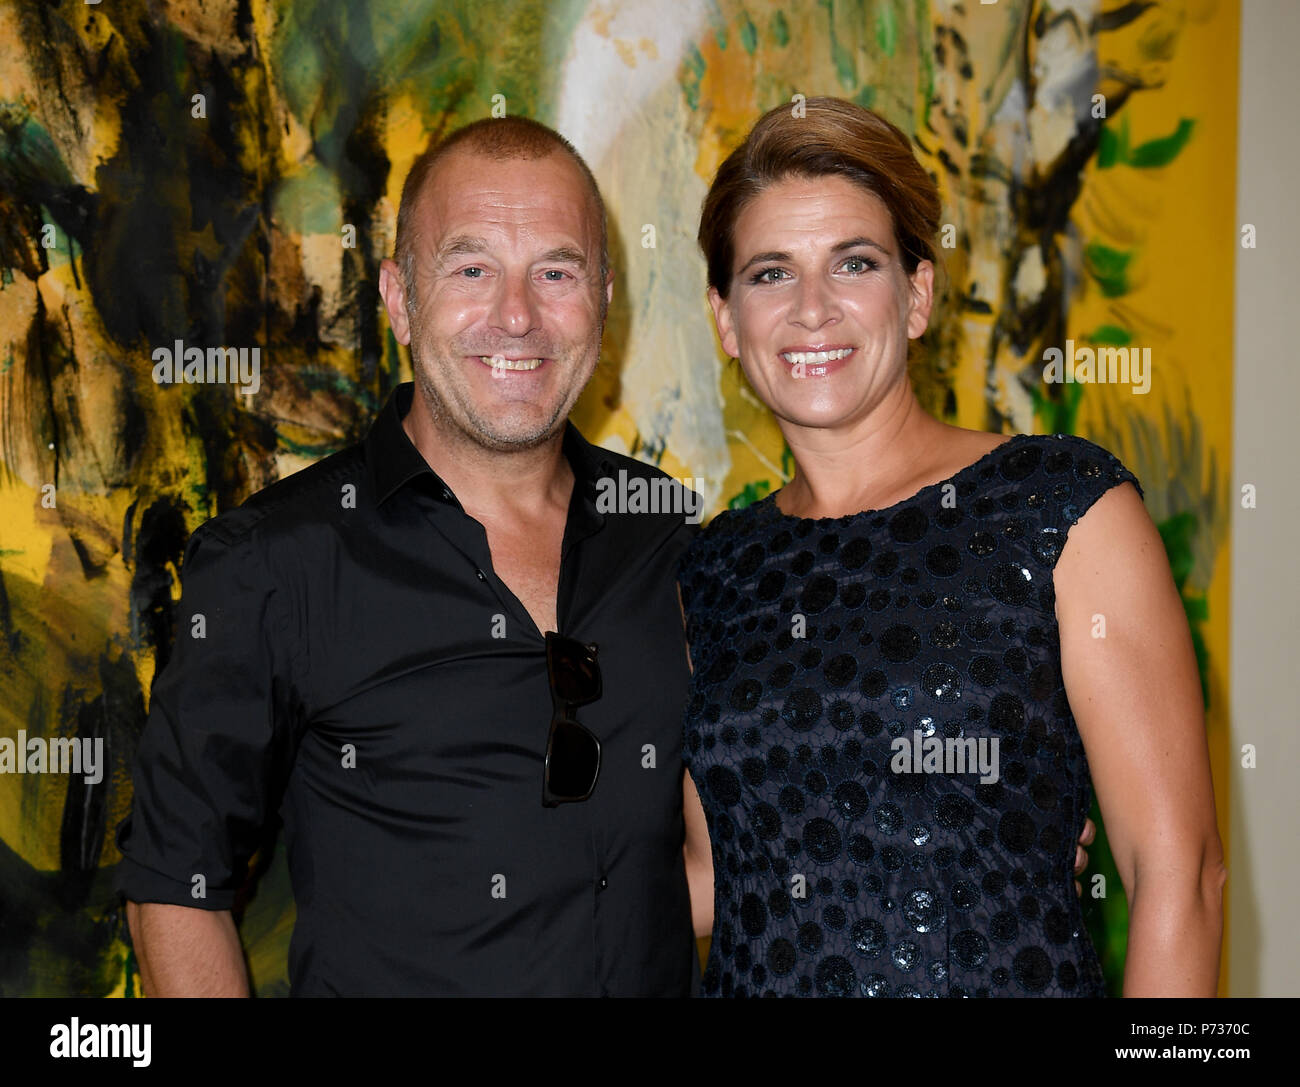 Berlin, Germany. 03rd July, 2018. Actor Heino Ferch and his wife Marie-Jeanette attend an installation of the fashion label Laurel at the Berlin Fashion Week, which runs until 07 July and showcases collections for the spring and summer of 2019. Credit: Britta Pedersen/dpa-Zentralbild/dpa/Alamy Live News Stock Photo